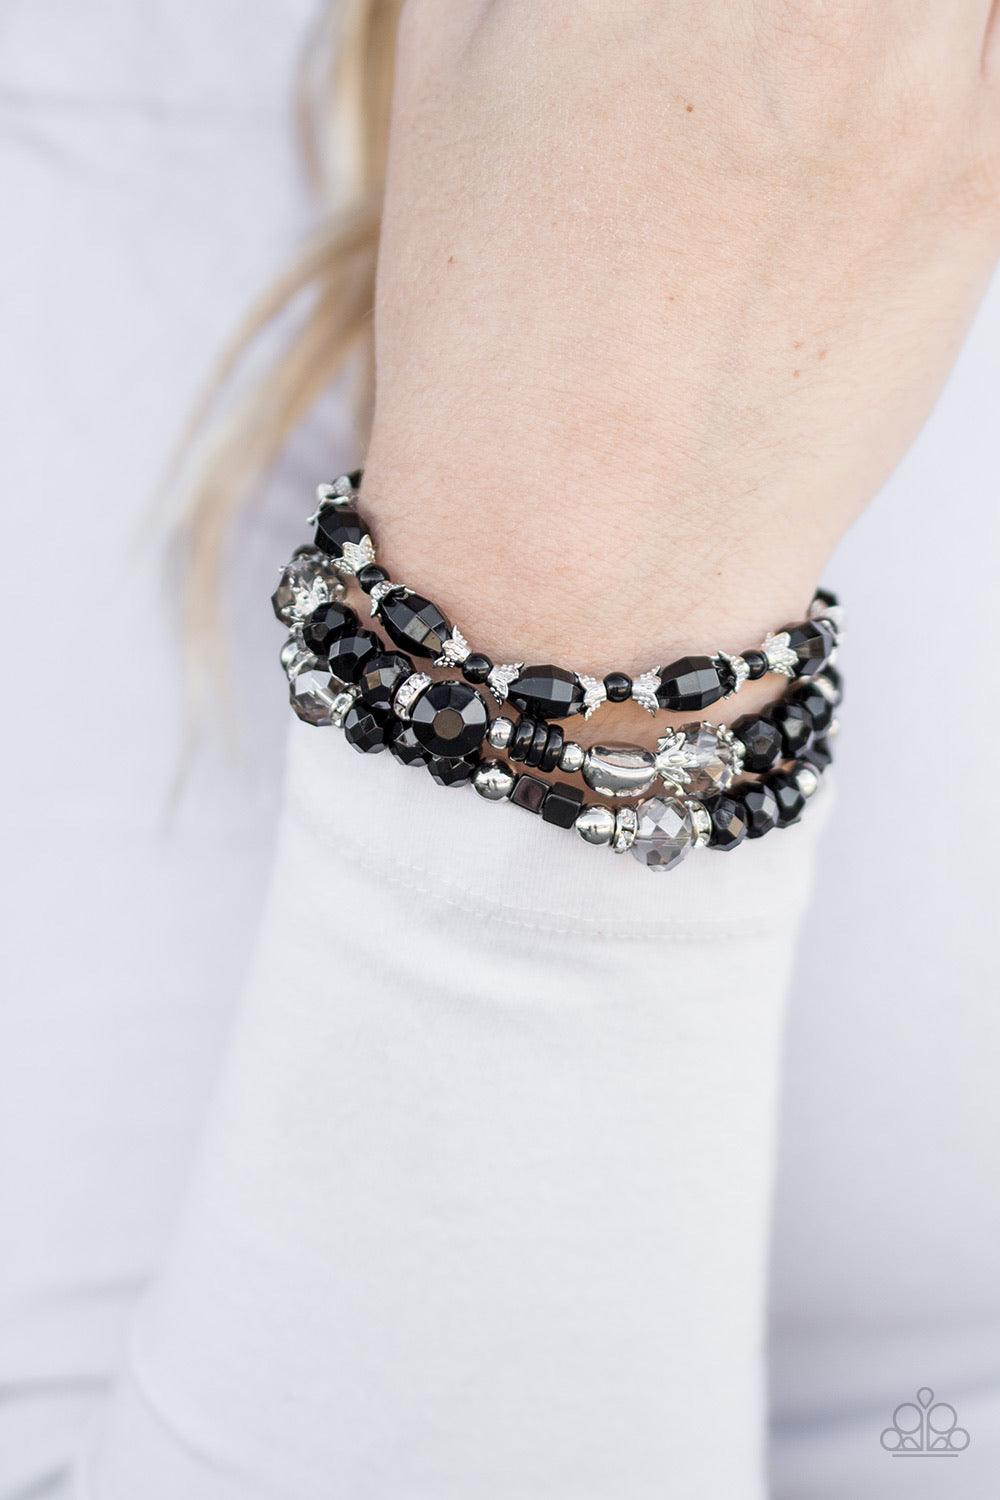 Paparazzi Accessories Girl Boss - Black Encrusted in glittery white rhinestones, shimmery silver rings, classic silver beads, and neutral black beads are threaded along three stretchy elastic bands. Faceted crystal-like beads are sprinkled between the col